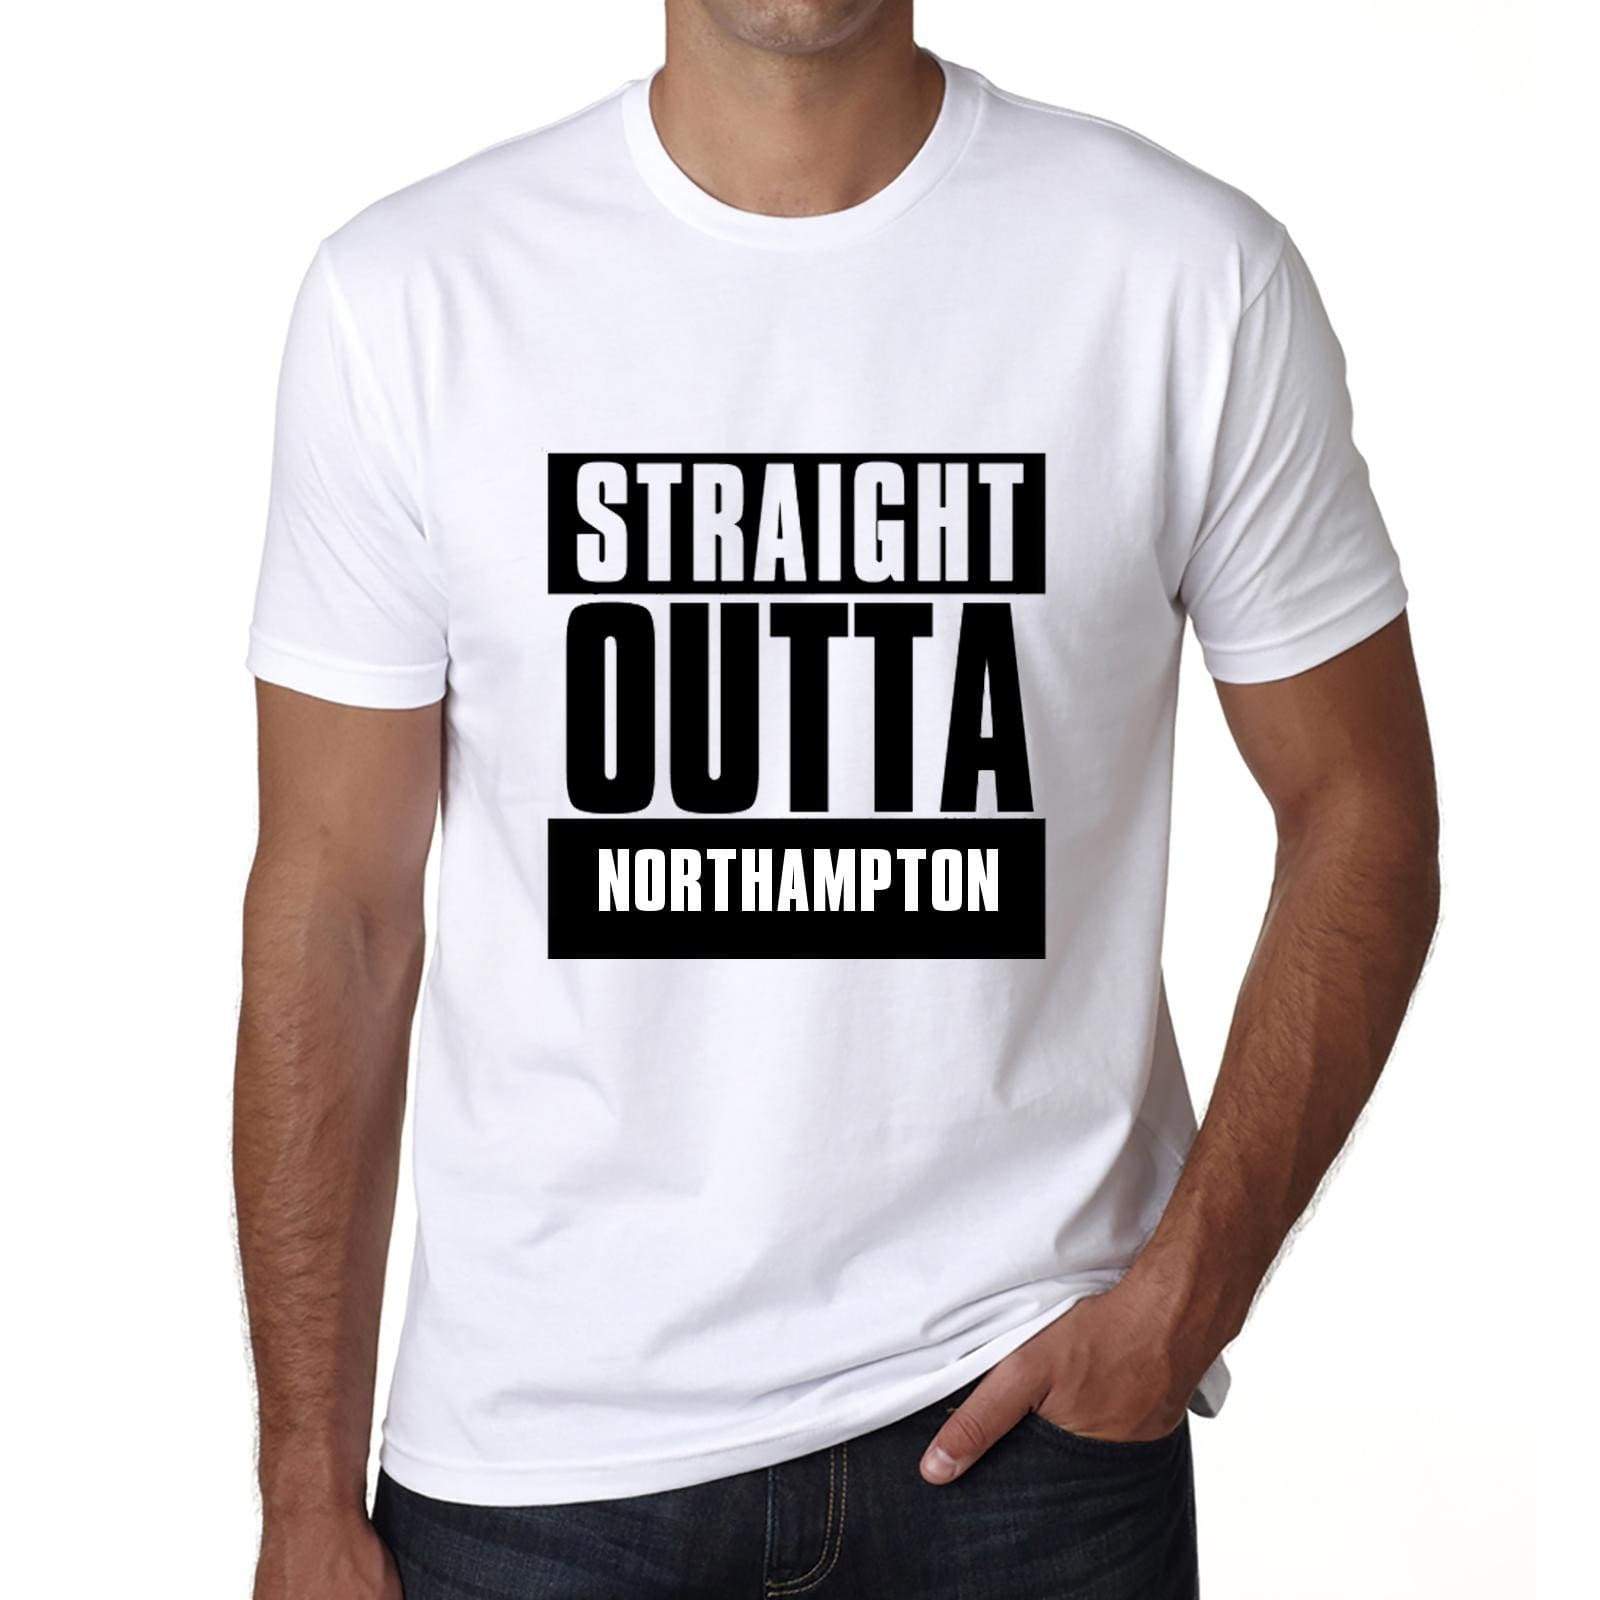 Straight Outta Northampton Mens Short Sleeve Round Neck T-Shirt 00027 - White / S - Casual